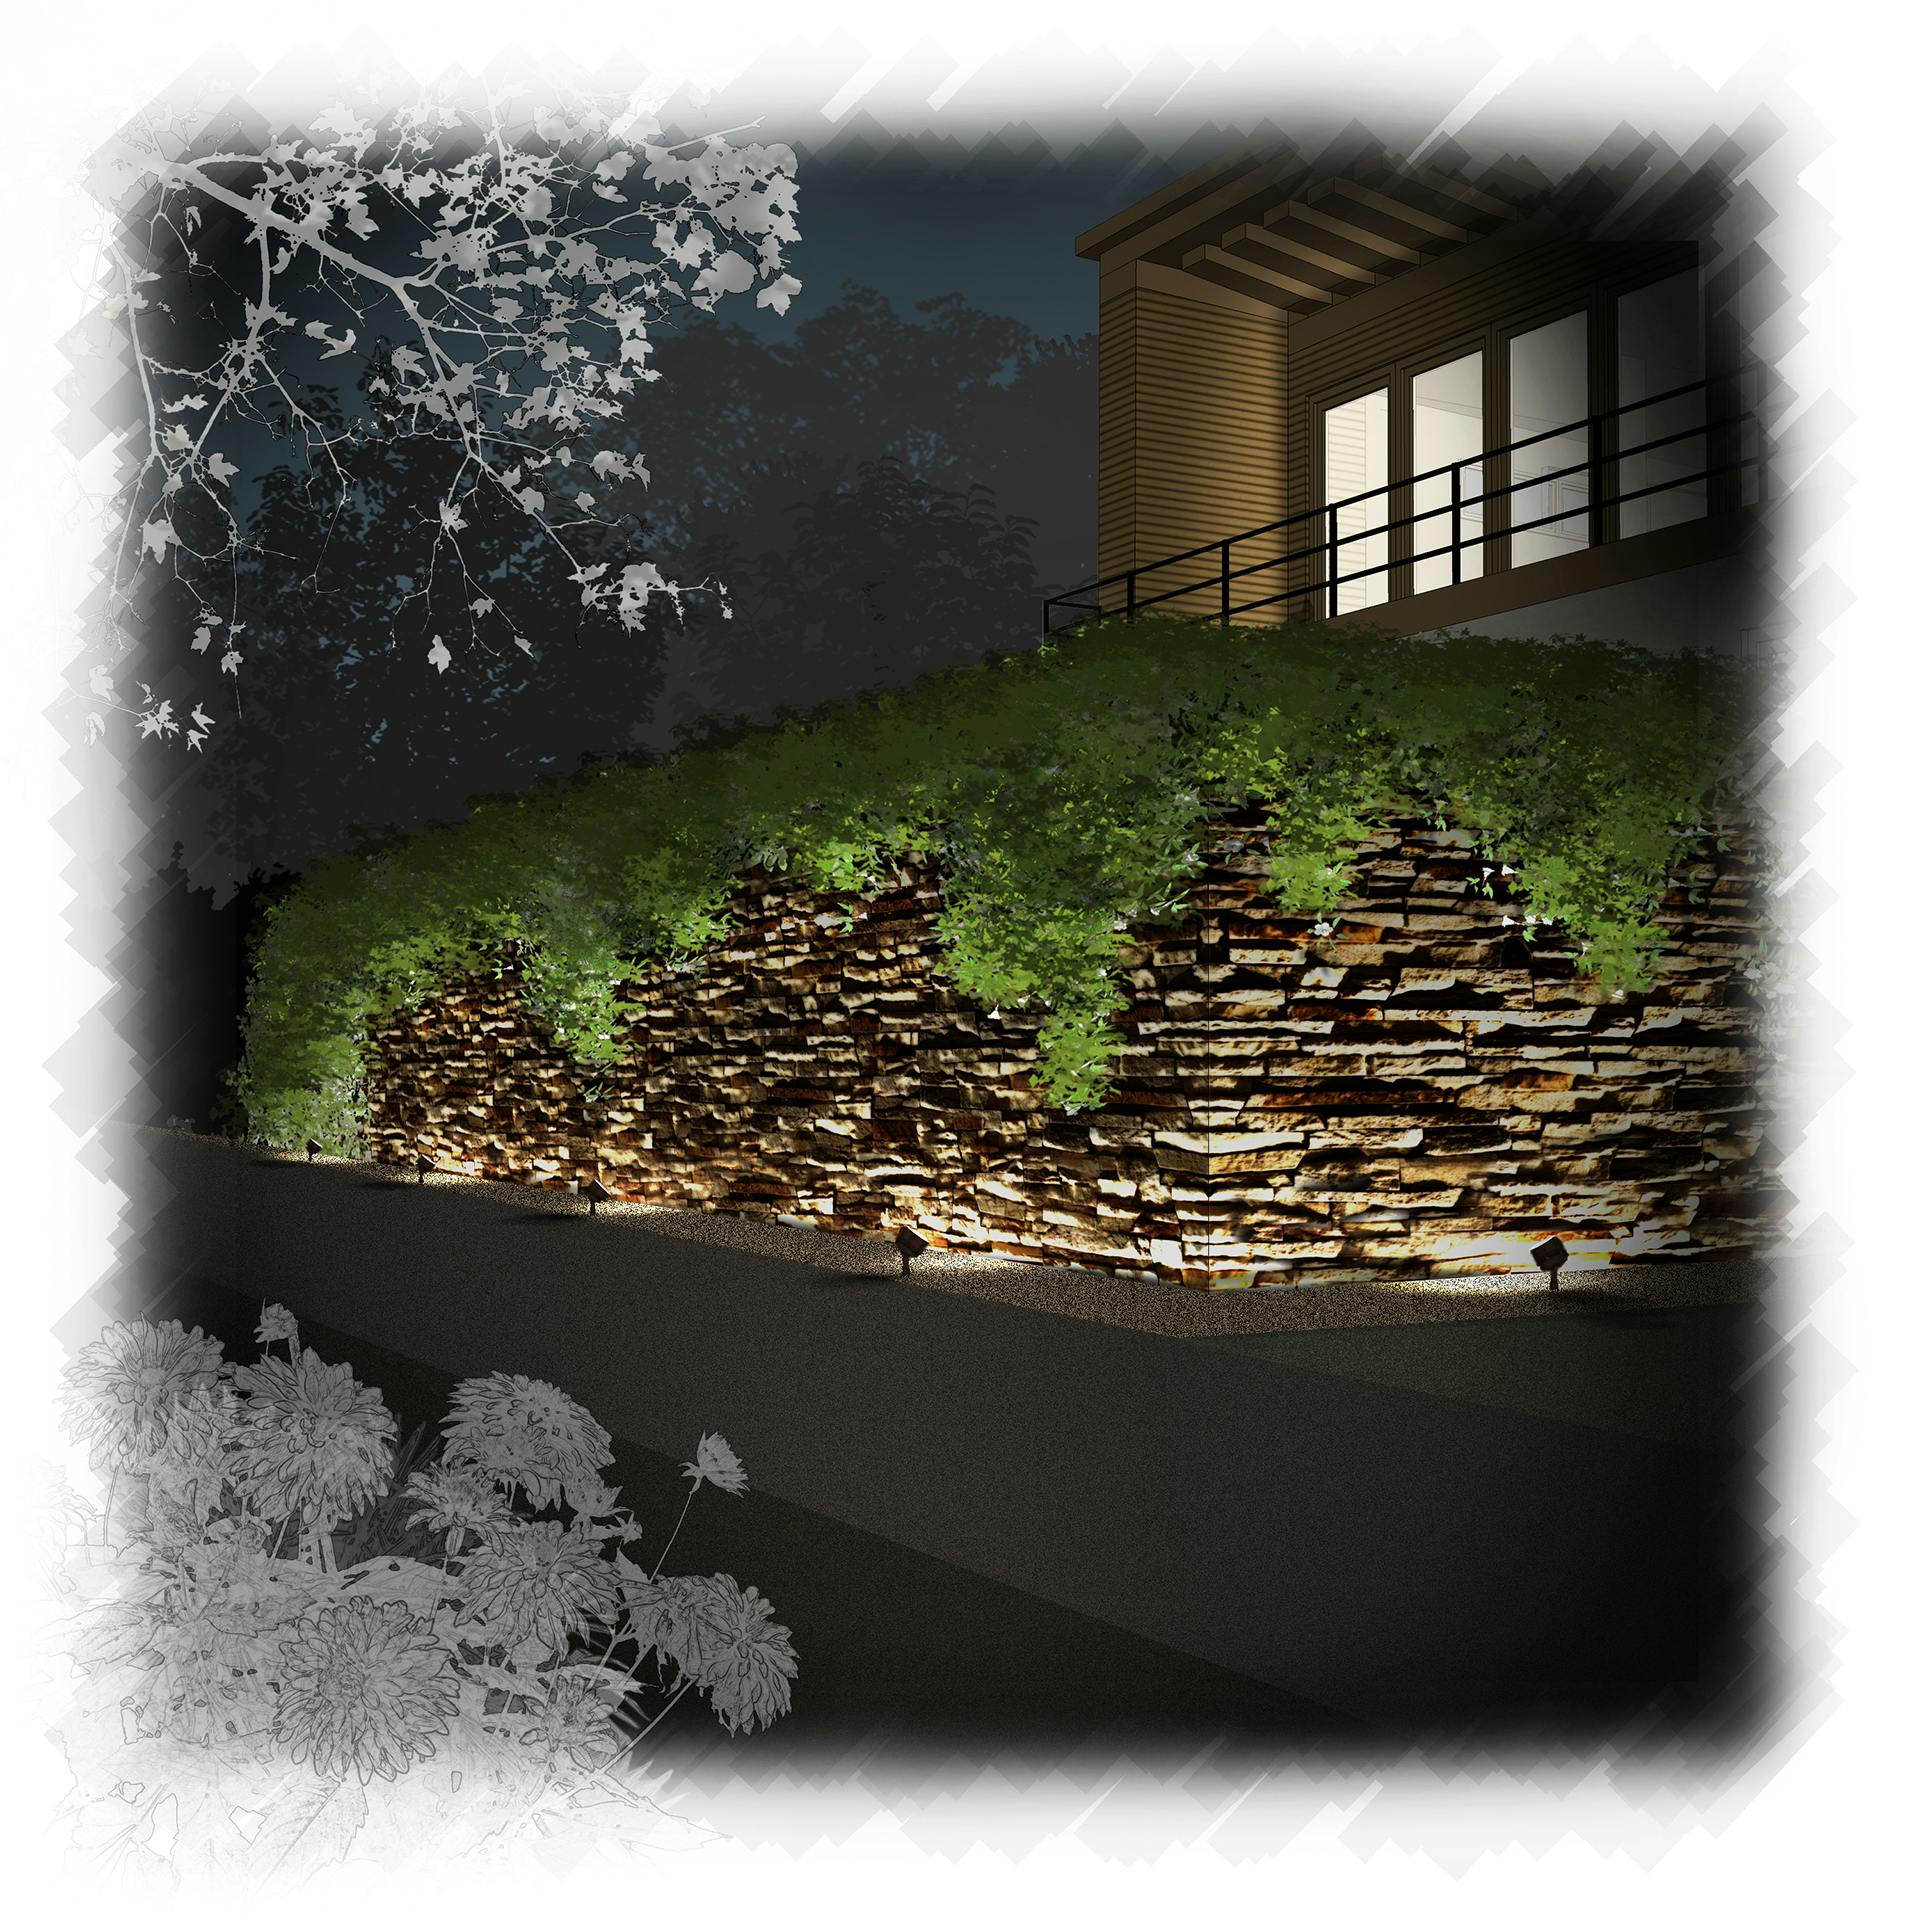 Illustration of a stone fence at night with up lighting